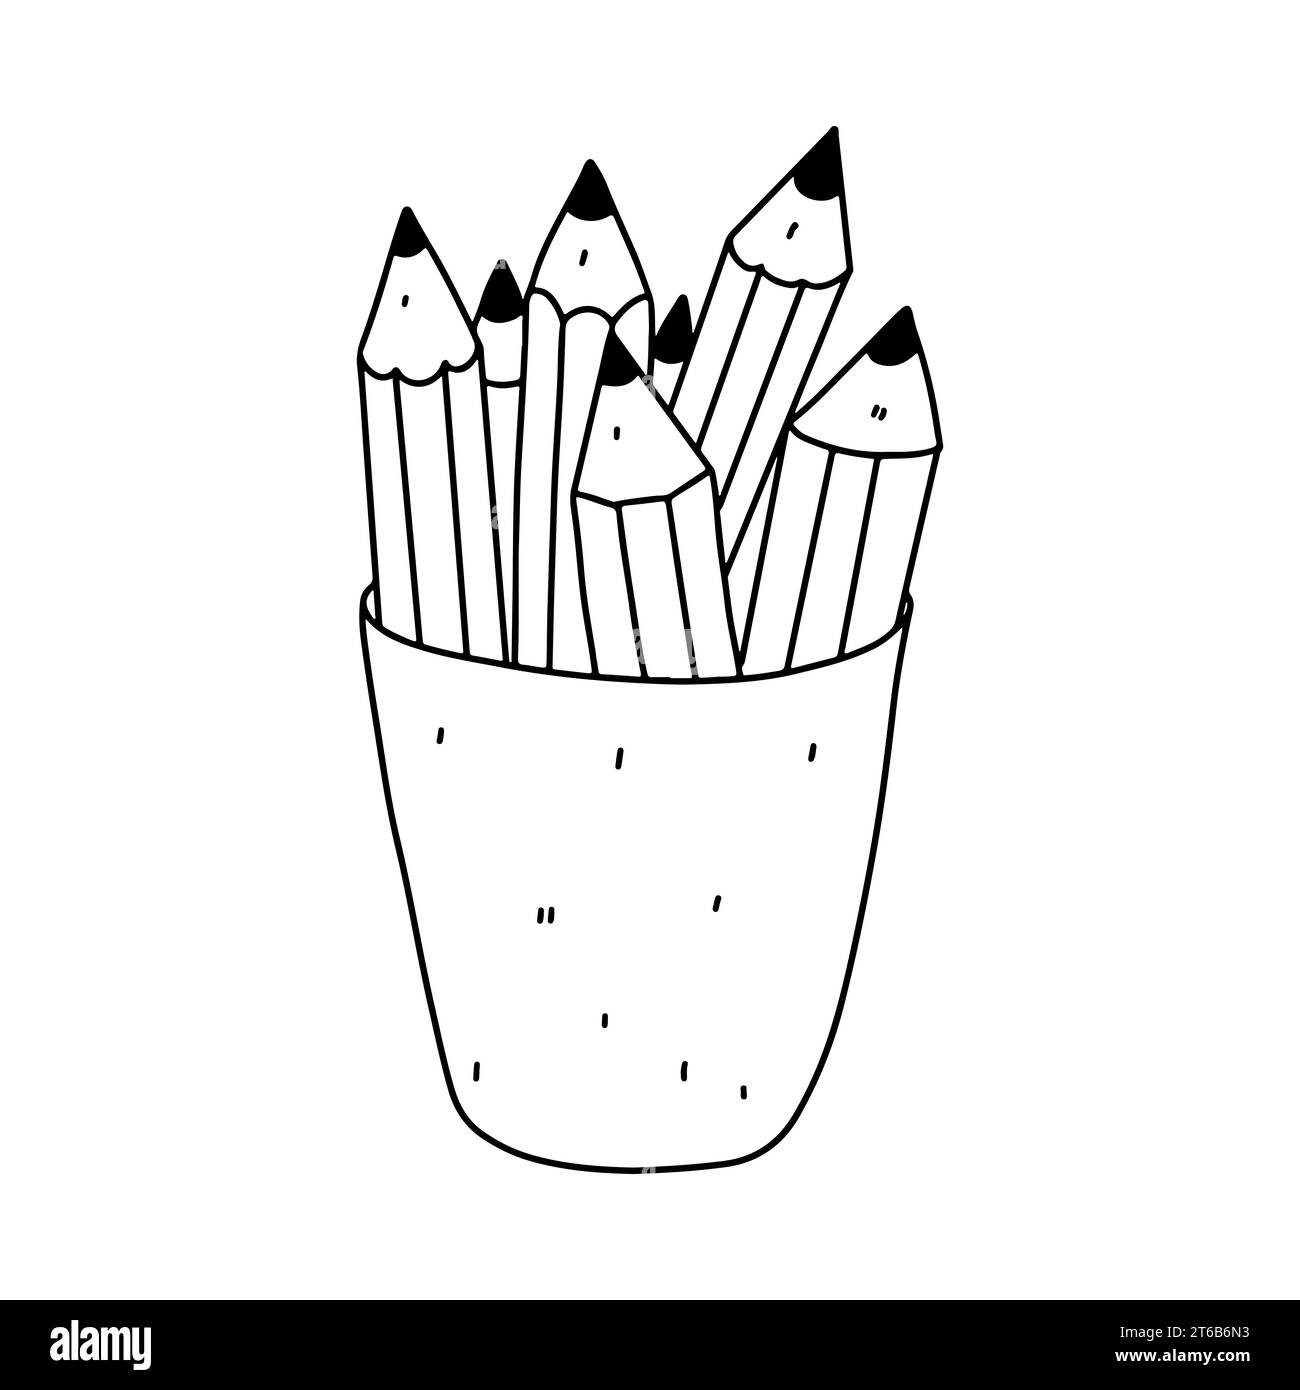 coloring picture of a pen - Google Search  Calligraphy pens, Coloring  pictures, Cartoon coloring pages